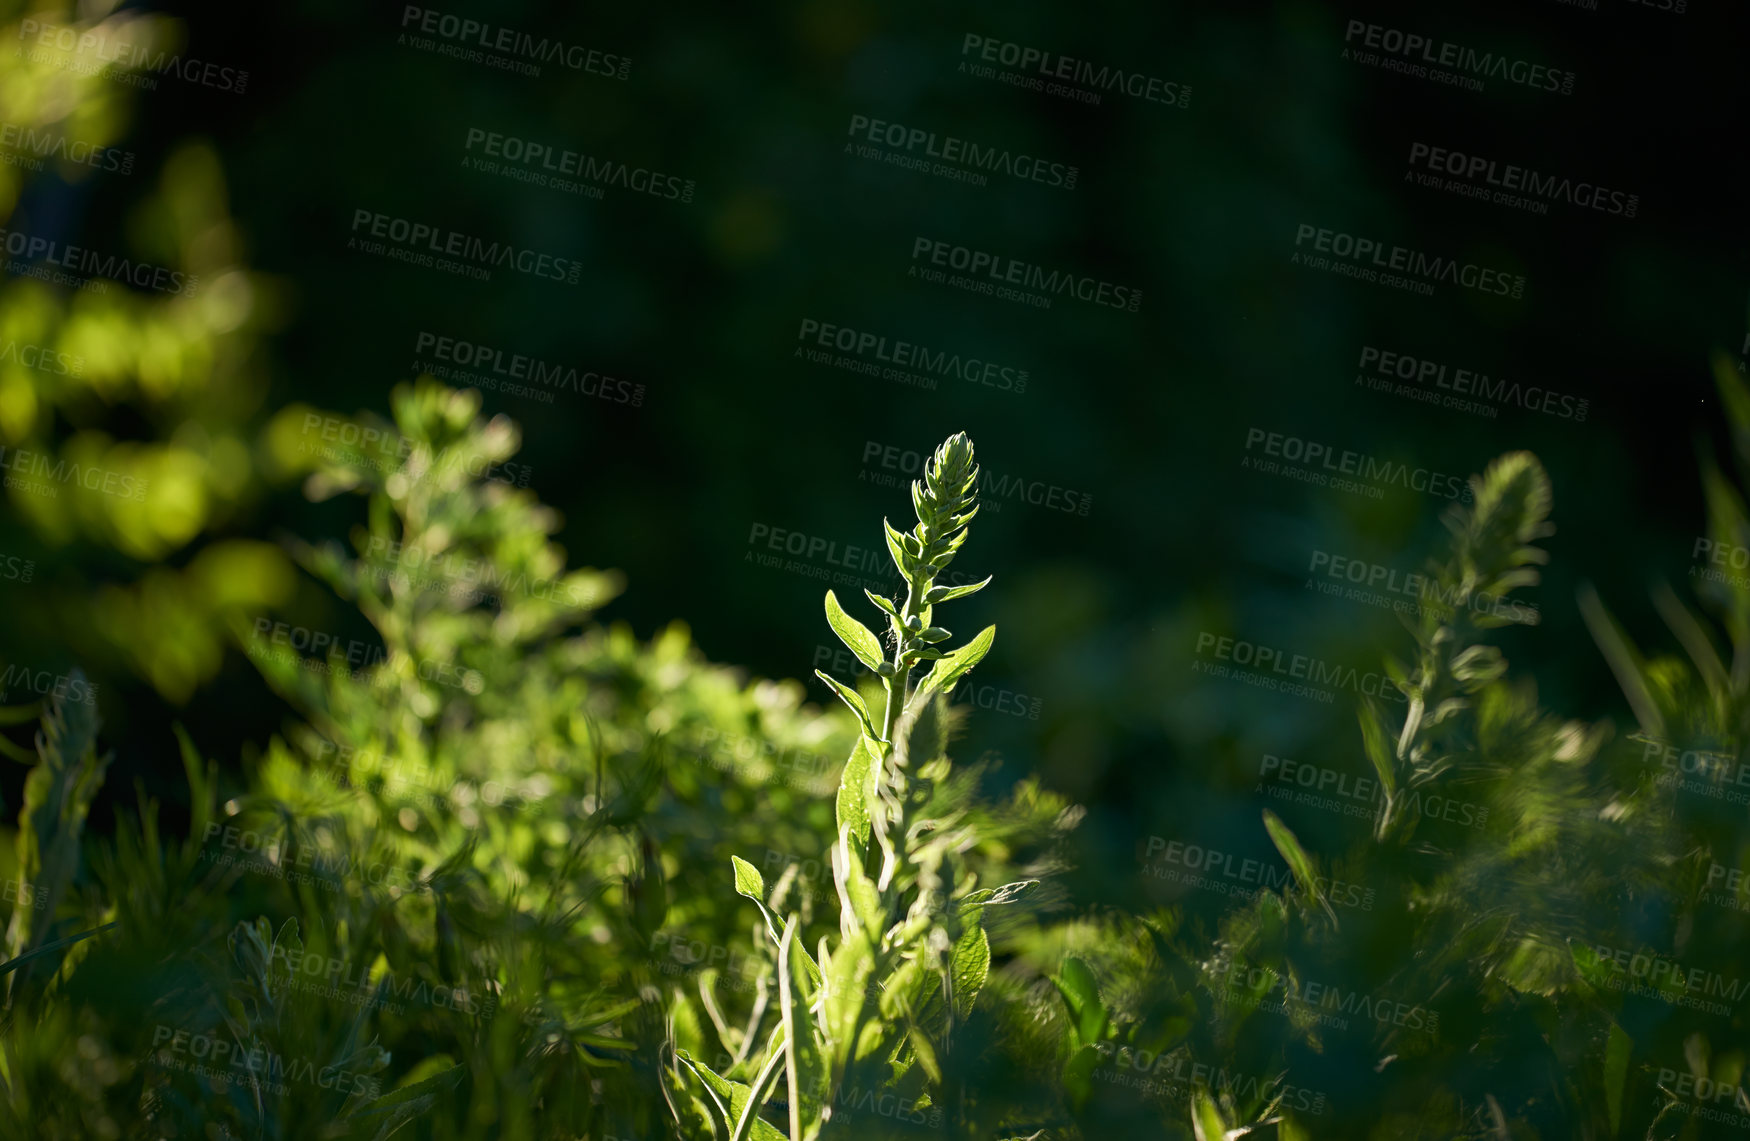 Buy stock photo Closeup of bright green leaves growing in a forest on a sunny day. Beautiful garden bush or plants outdoors in nature with copy space during summer. Vibrant flora outside in a park or backyard